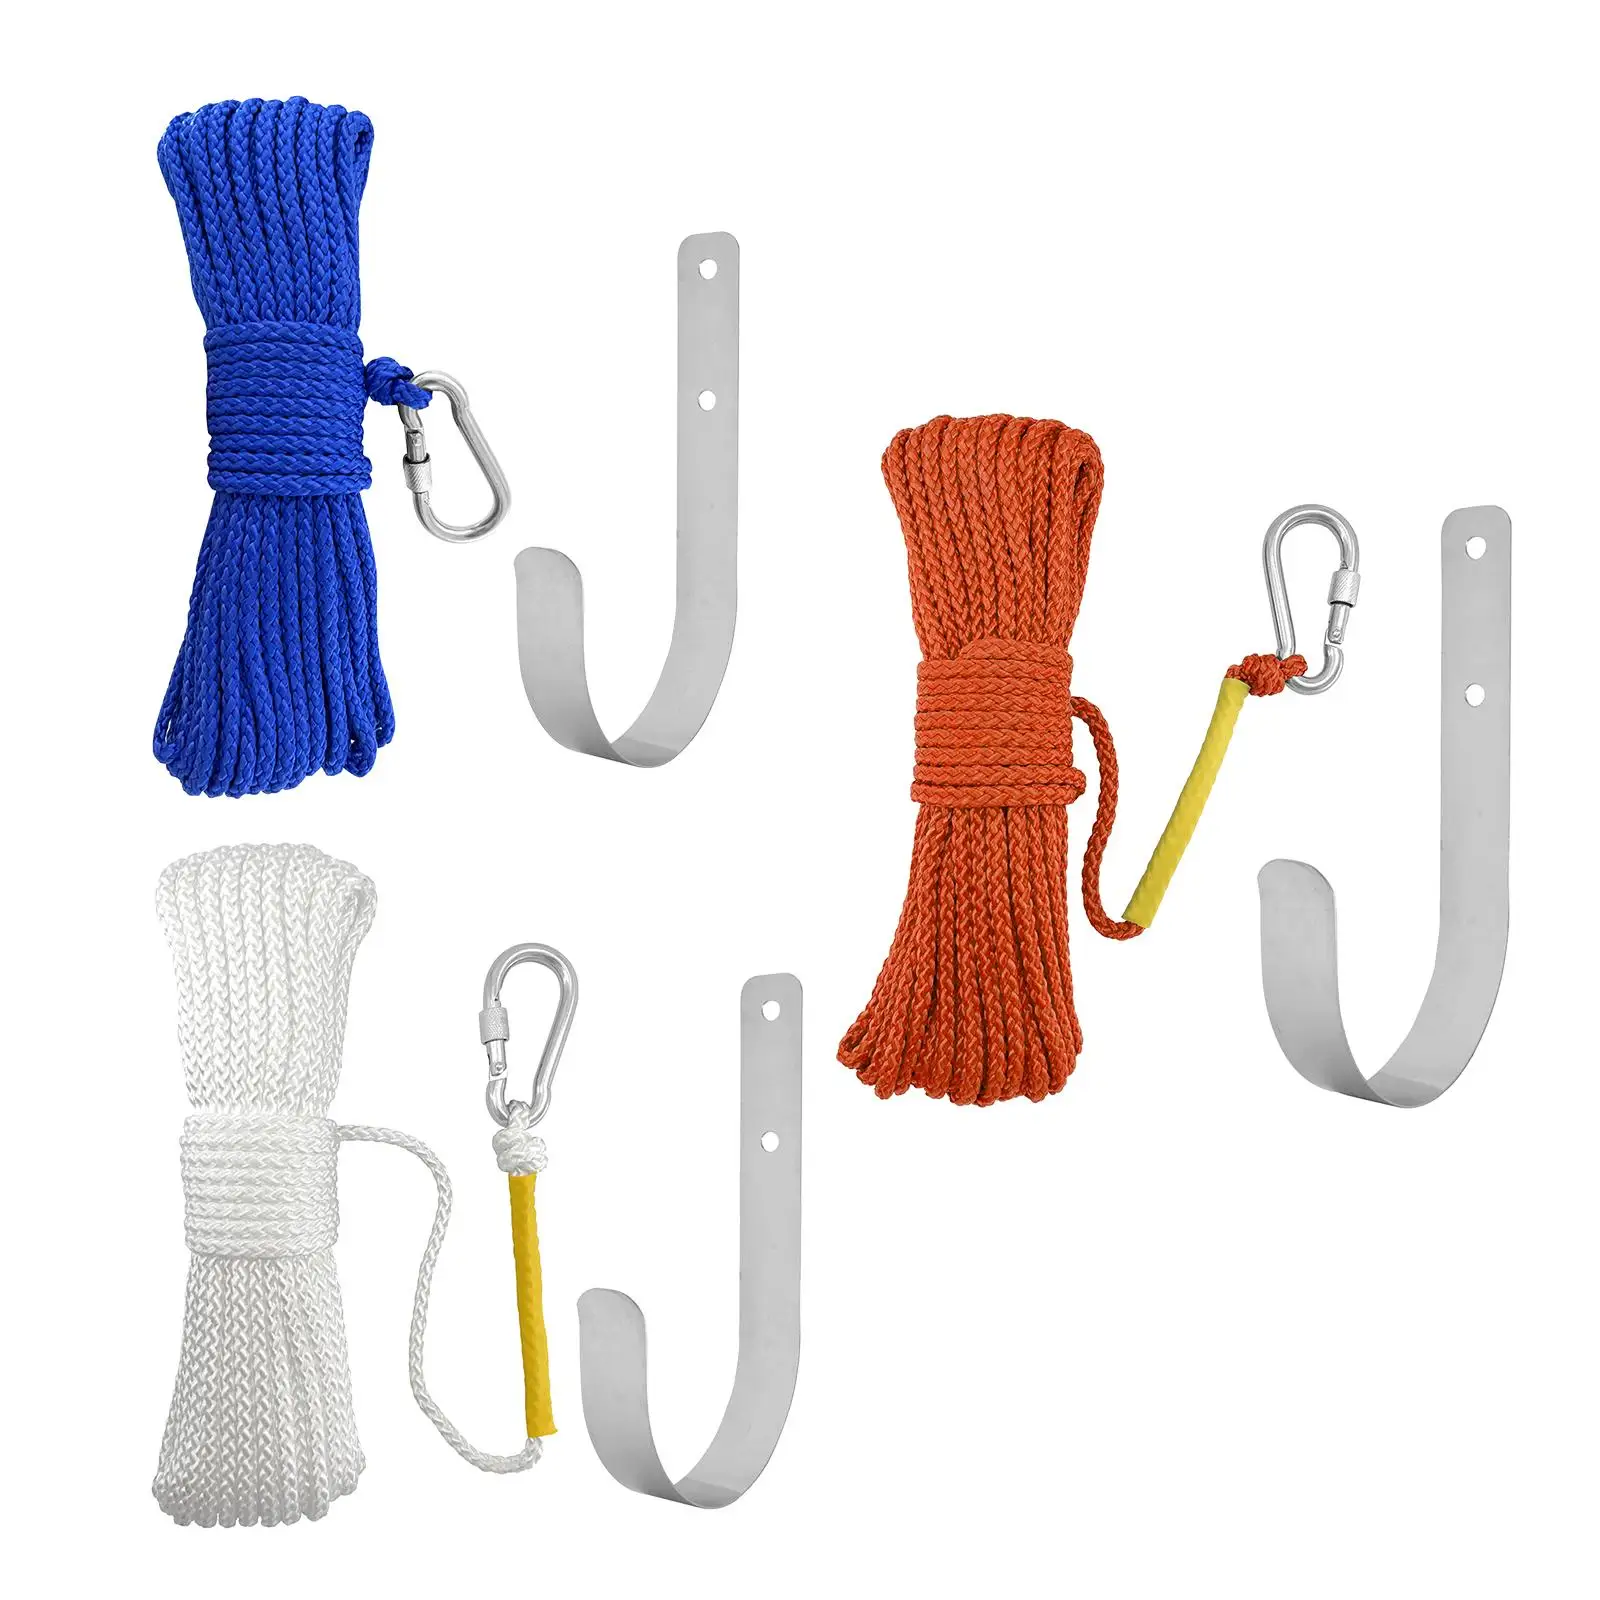 Fishing Nylon Rope Set with Spring hook for Magnet Fishing Hiking